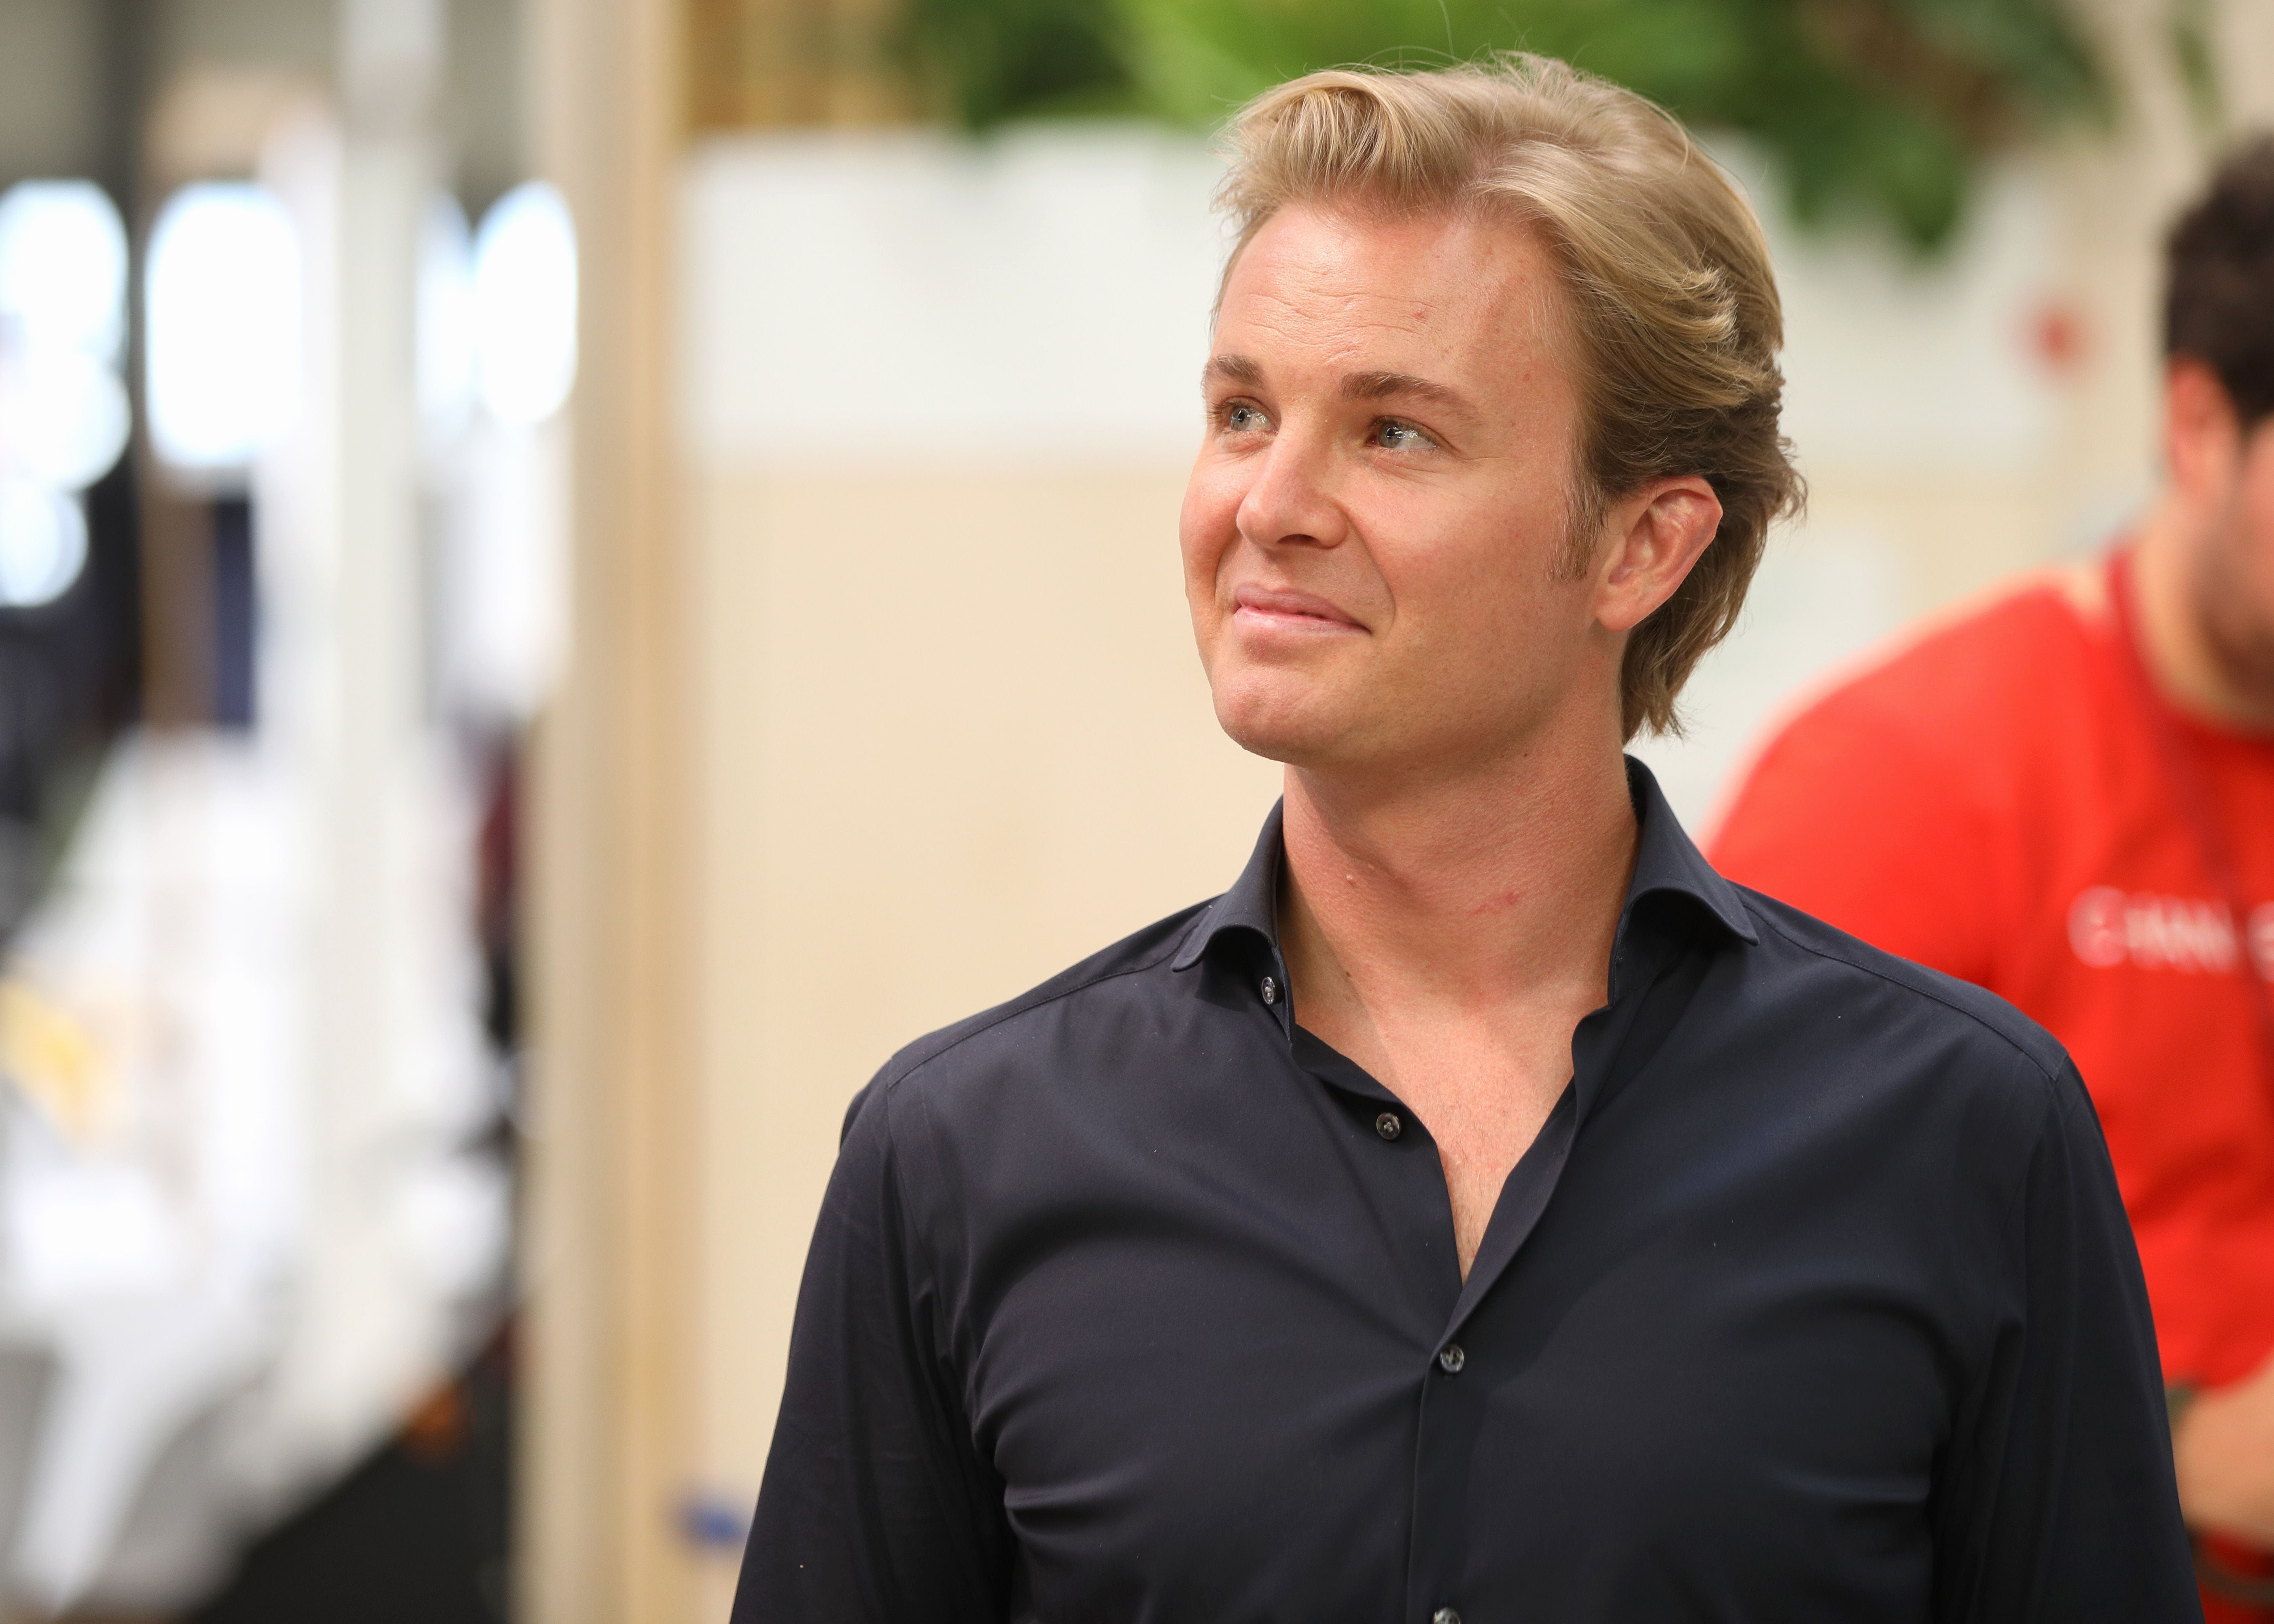 Nico Rosberg insists Mercedes’ car concept is “in a river” after the Bahrain Grand Prix